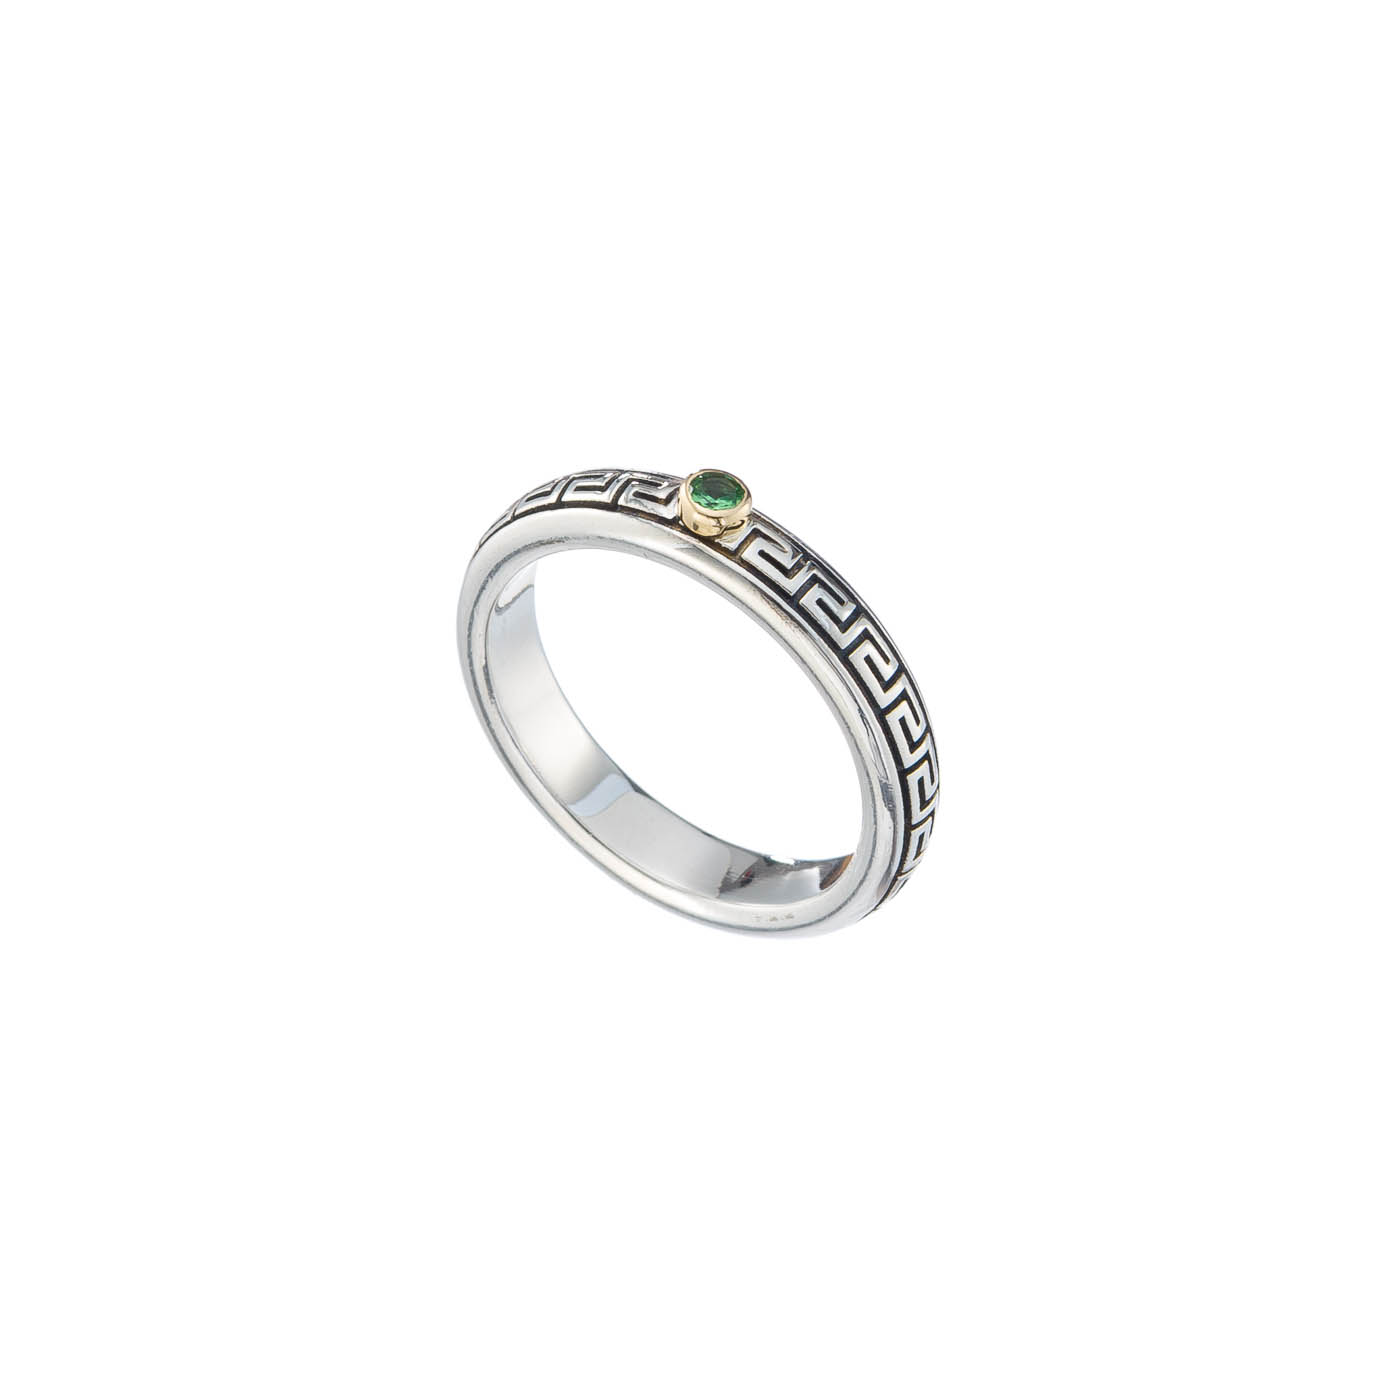 Meander band ring in sterling silver with 18K Gold and Gemstone